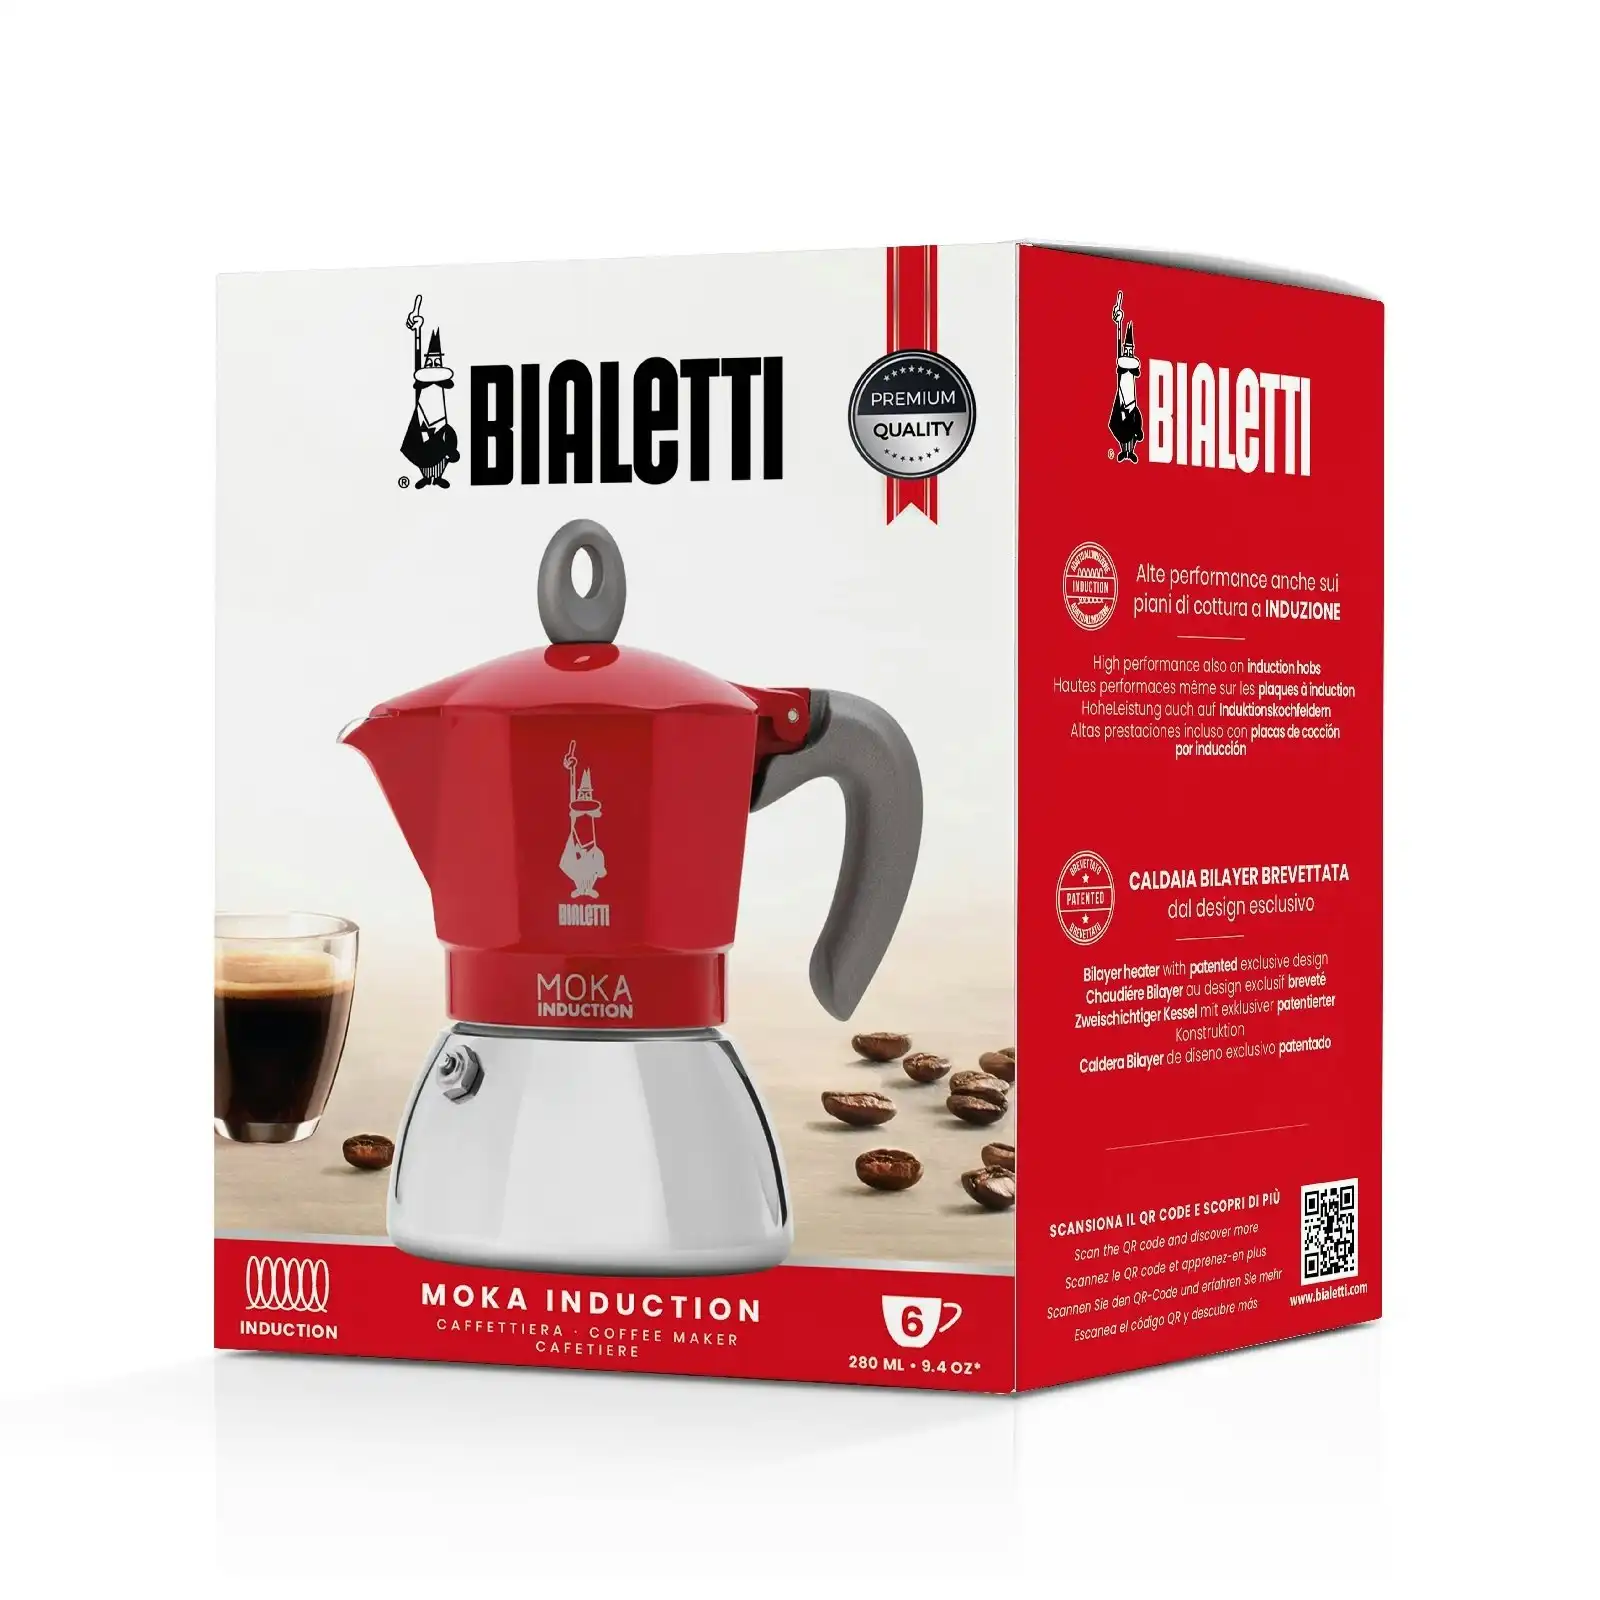 Bialetti Moka 6 Cup Induction Espresso Maker   Red